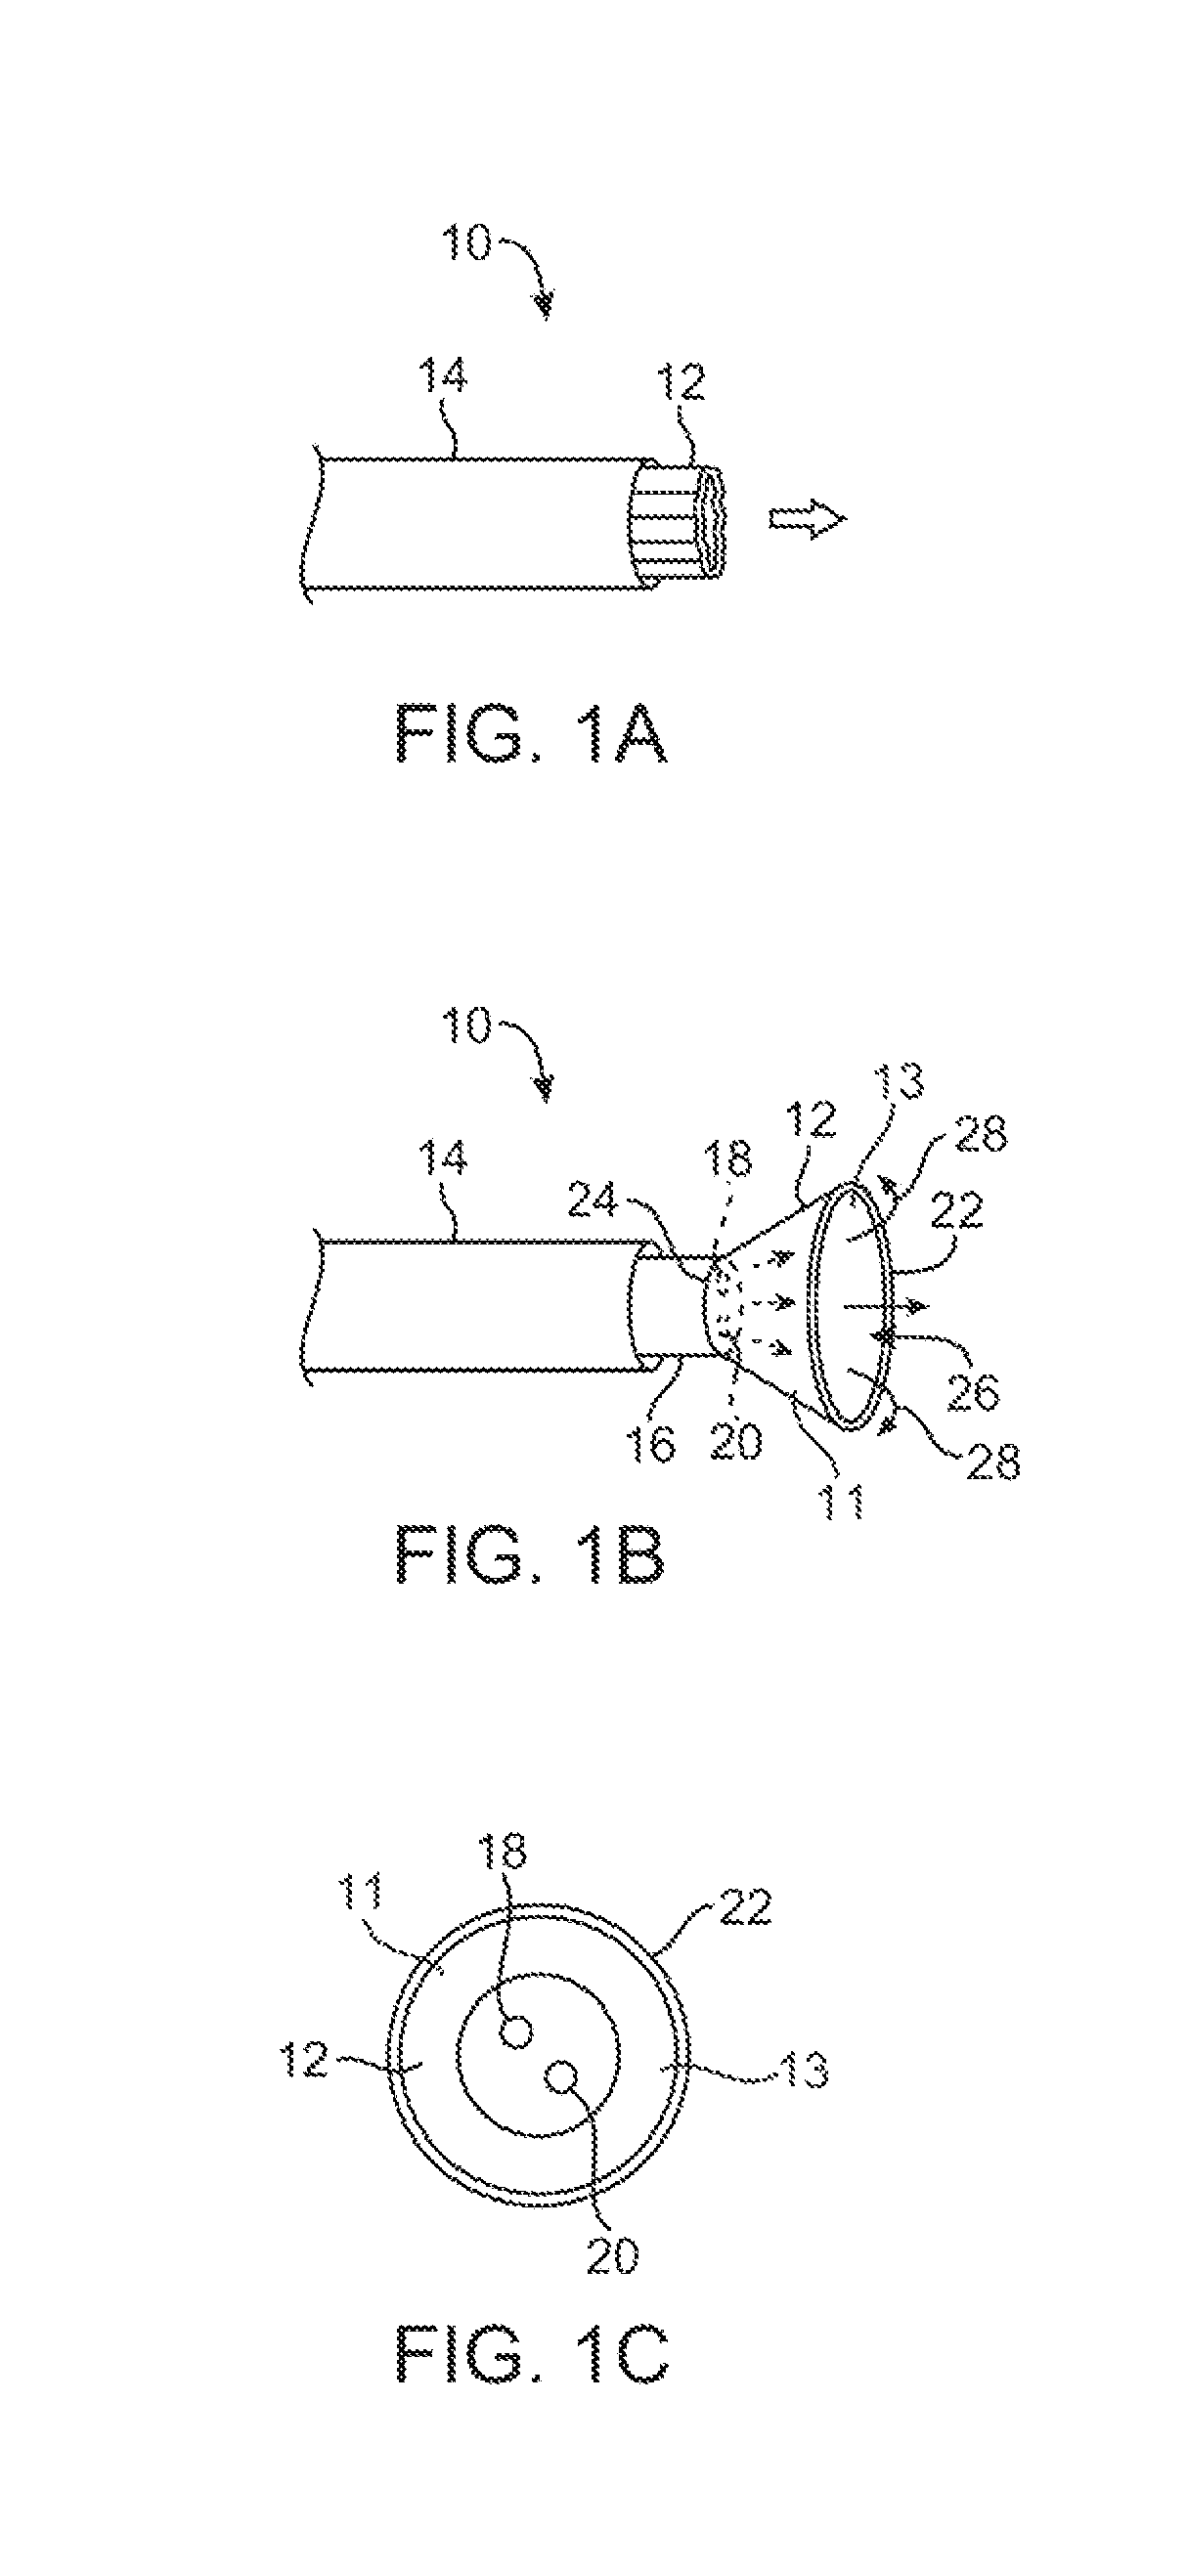 Integral electrode placement and connection systems